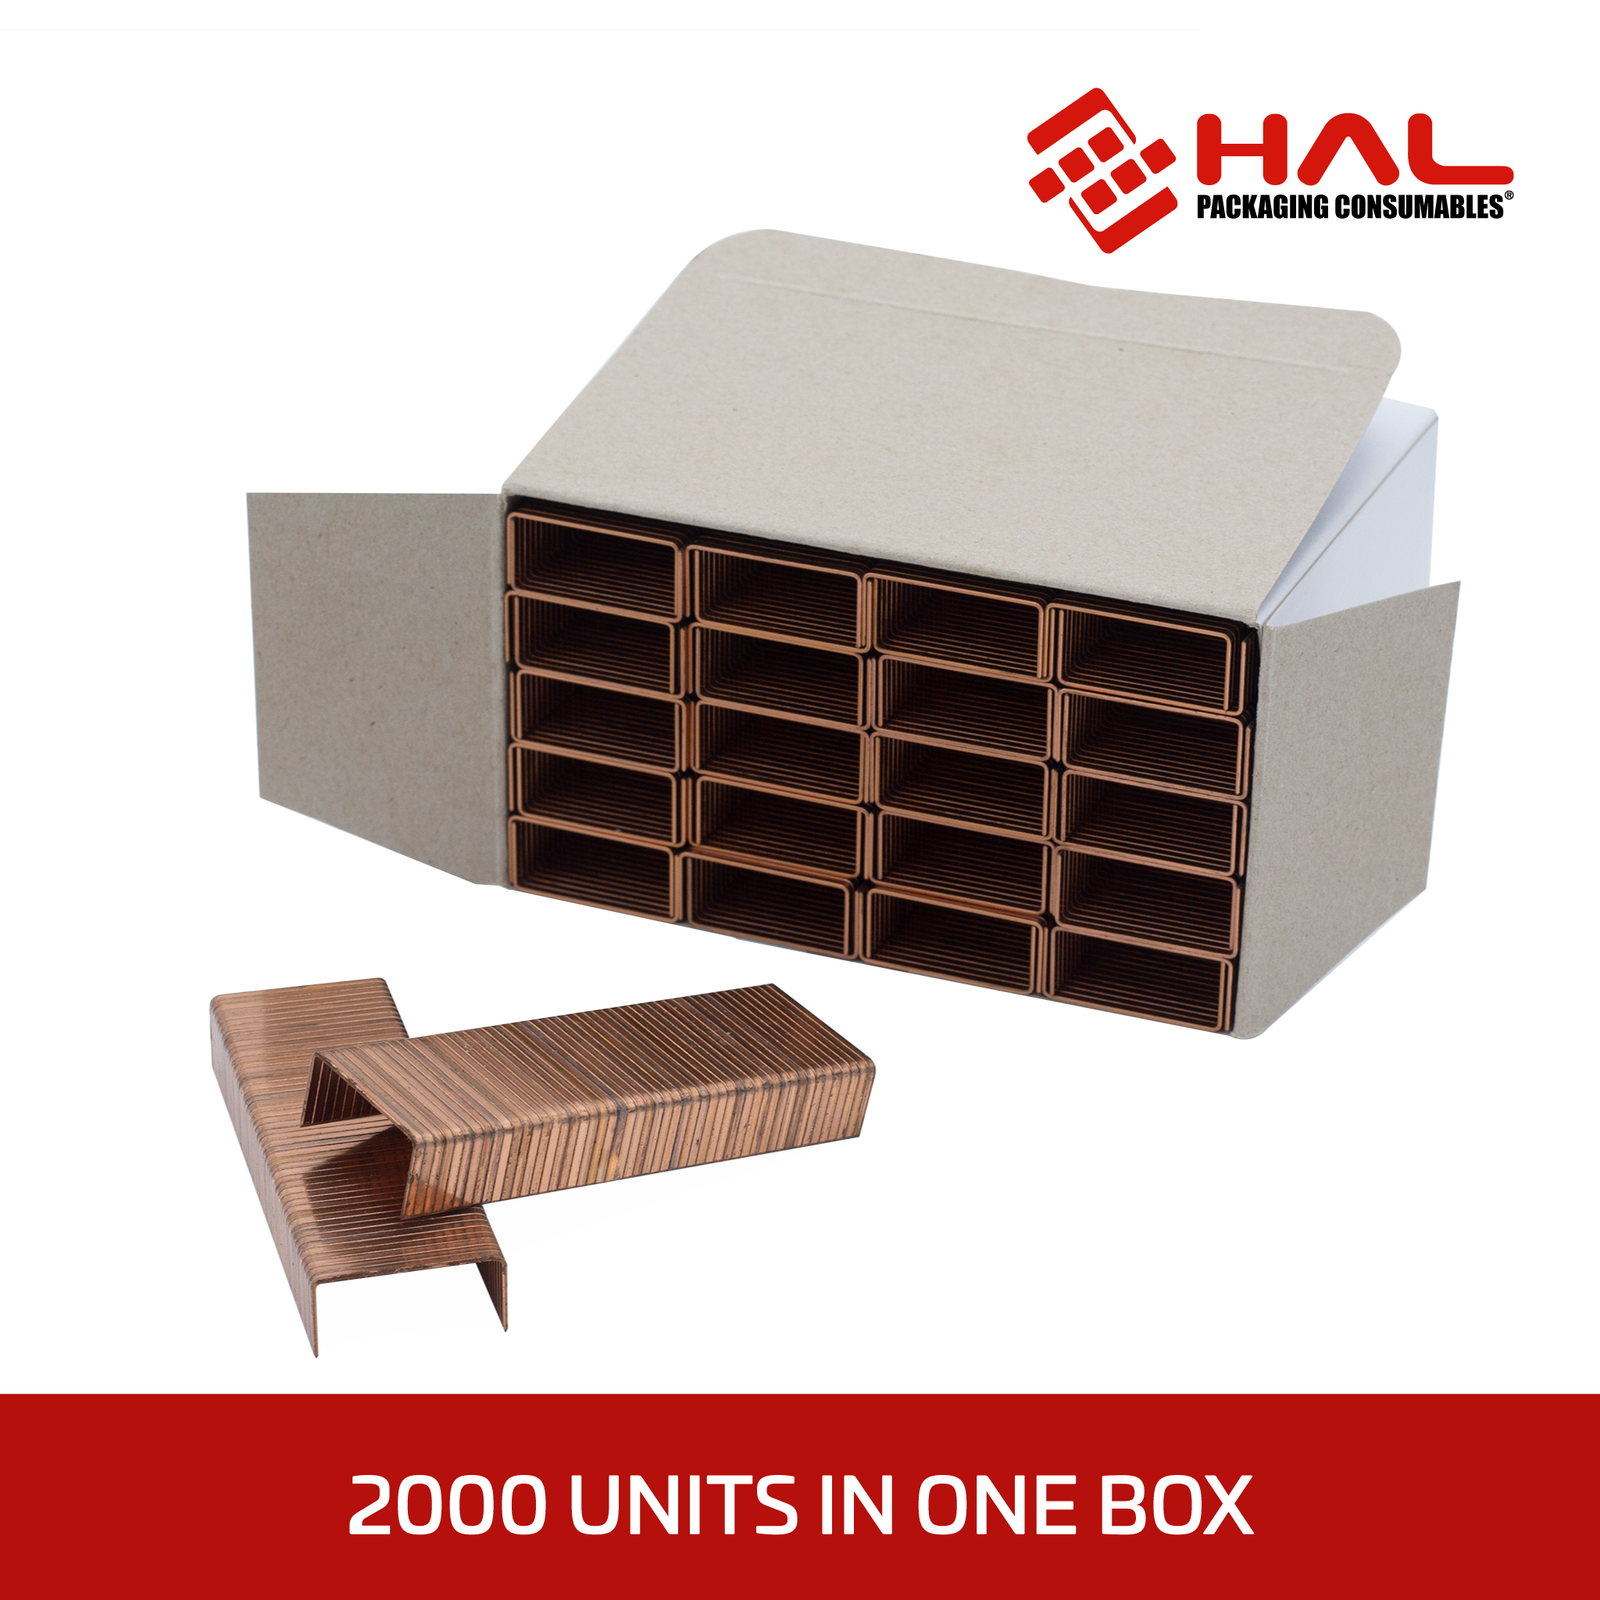 white box filled with copper colored with red hal logo. image shows title in red 2000 units in one box